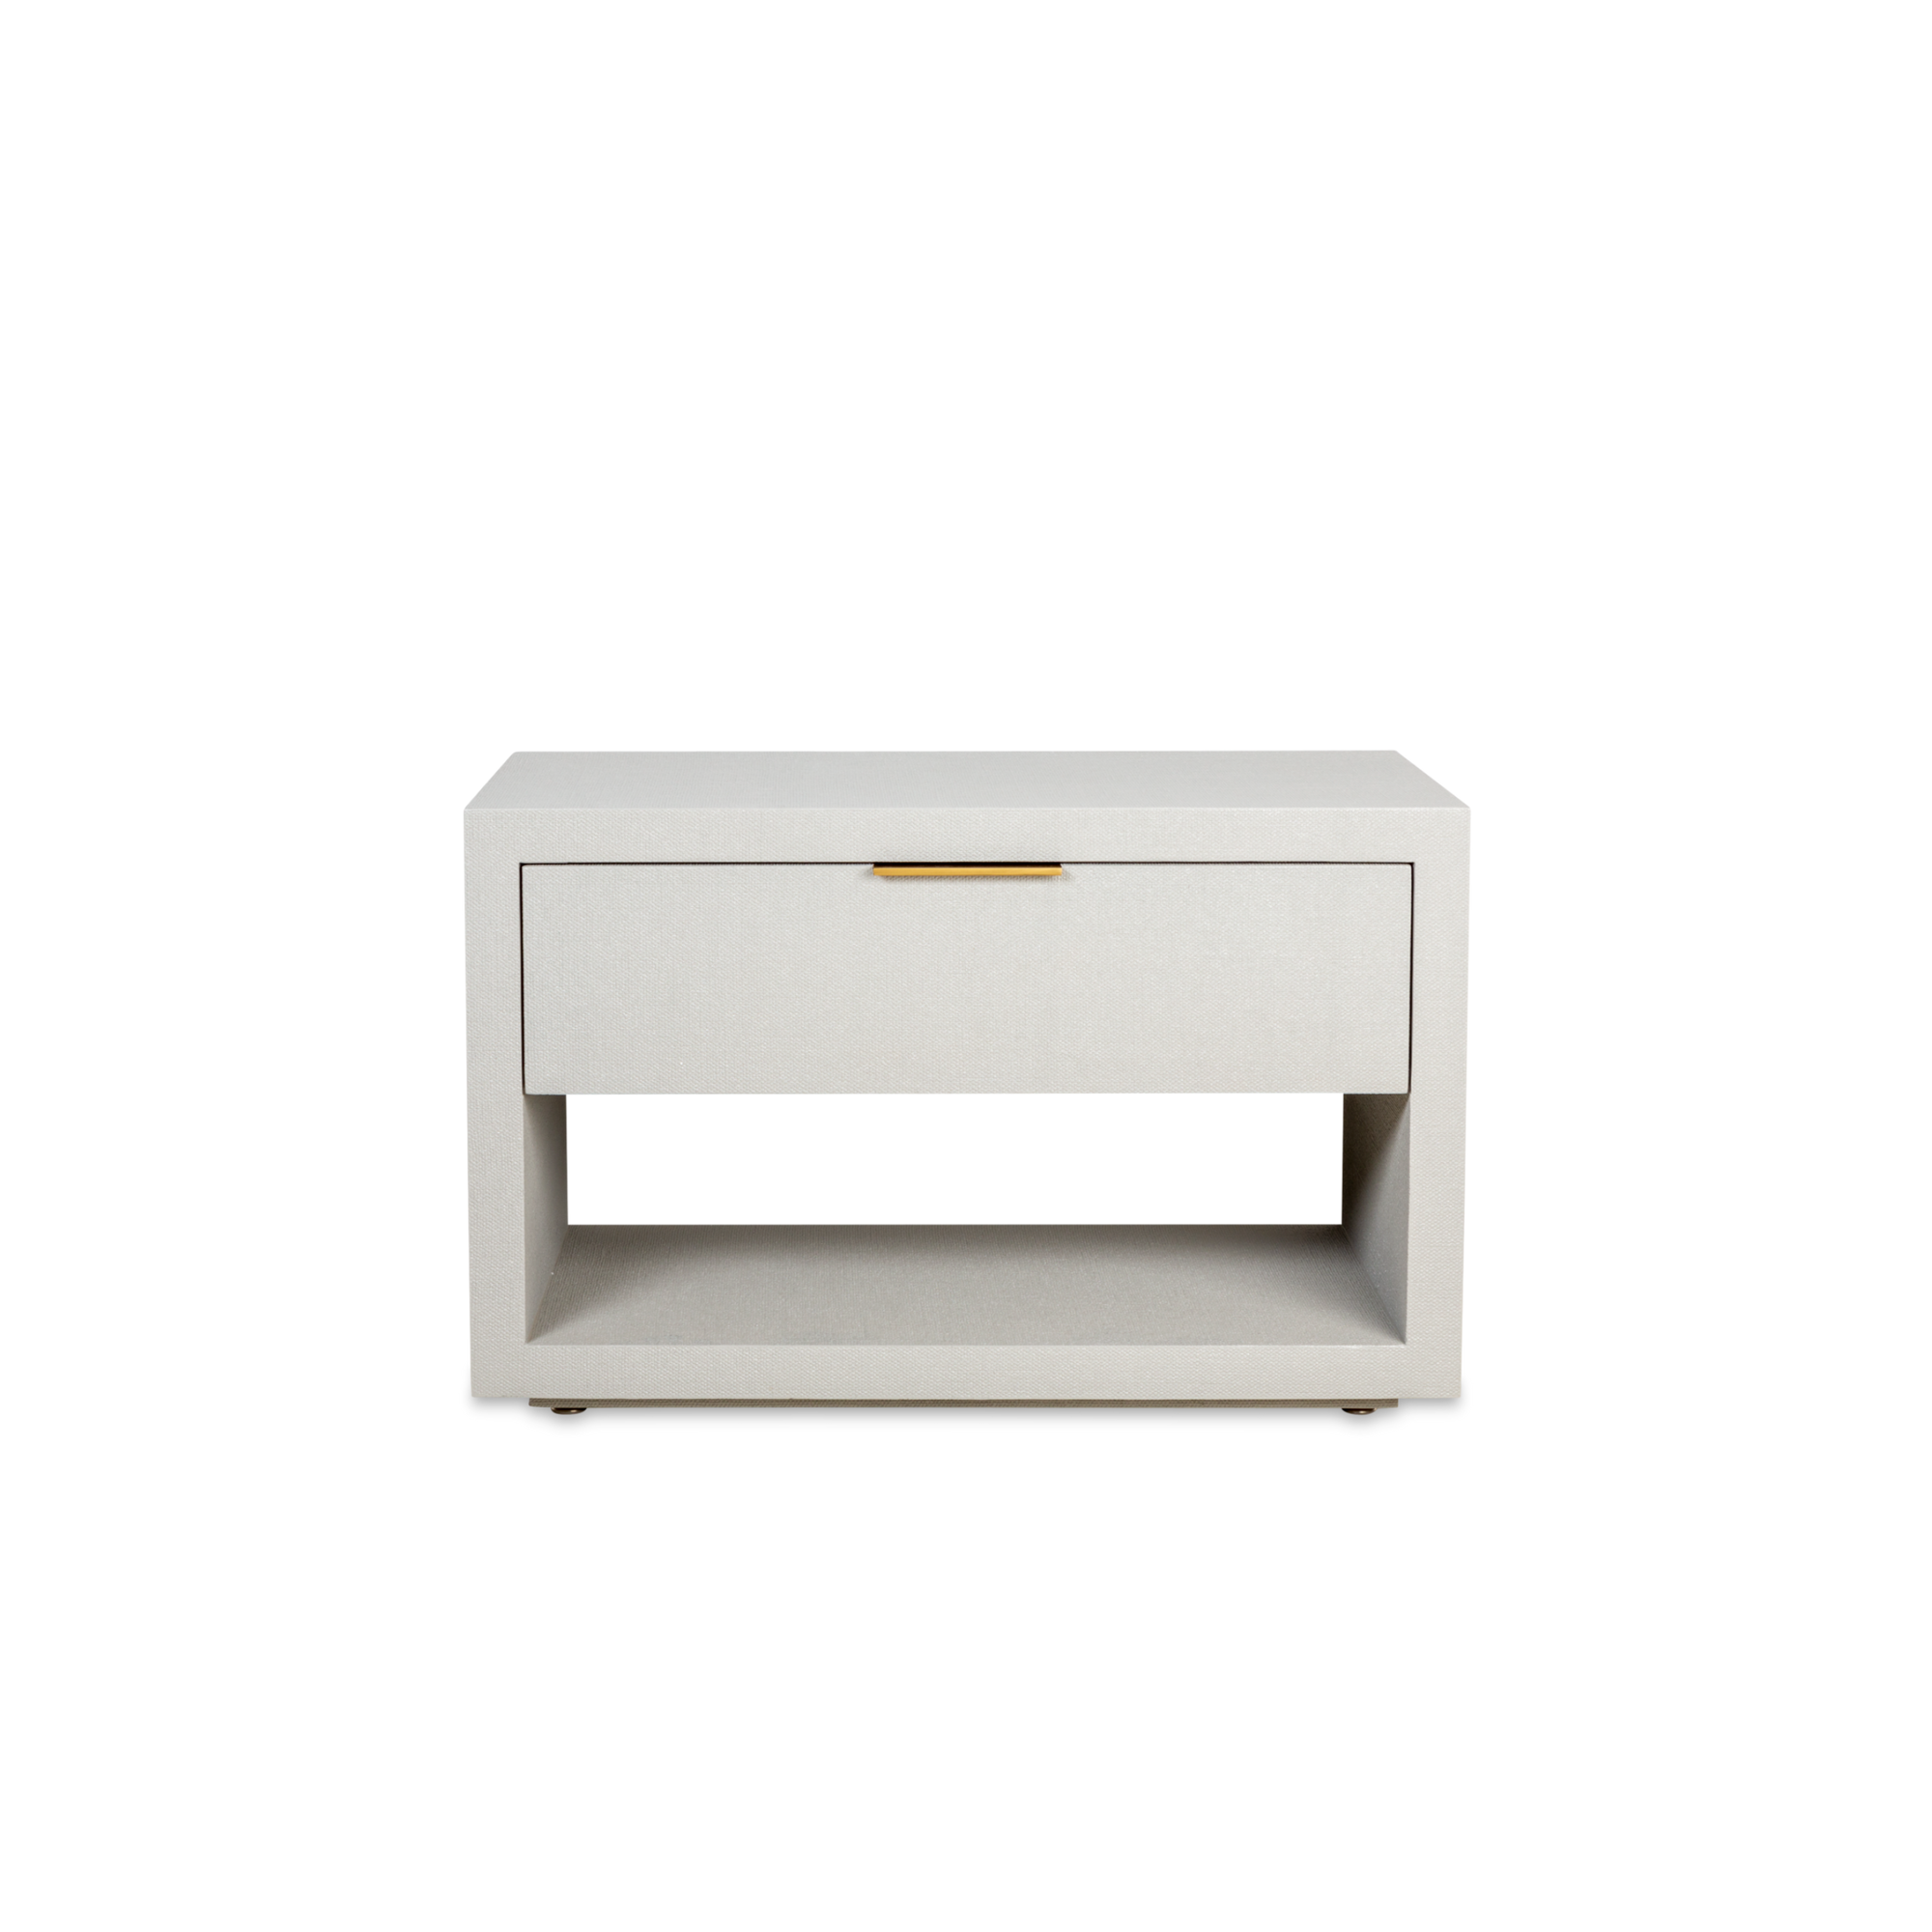 With its clean lines and textured surface, the Corey Nightstand offers the ultimate contemporary style for your bedroom.